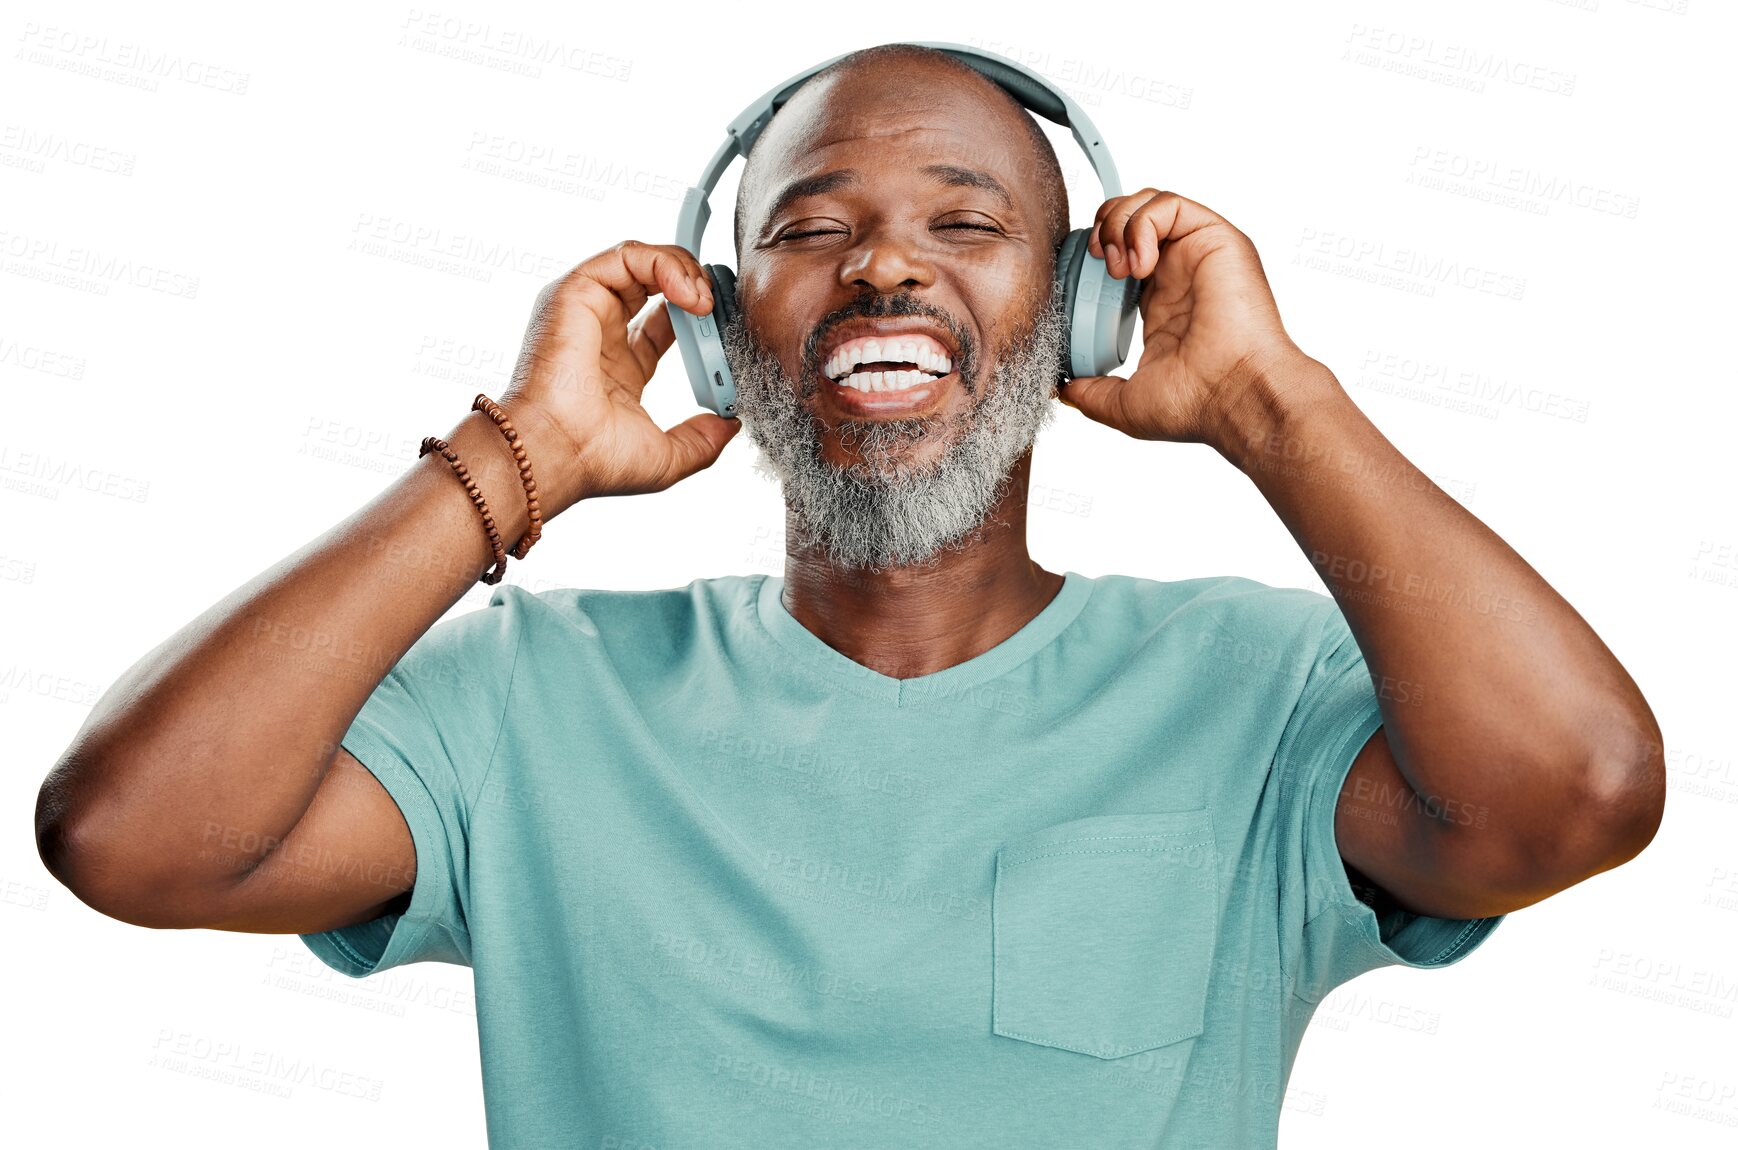 Buy stock photo Music, dance and audio with a senior black man isolated on a transparent background for fun. Freedom, relax or smile with a happy mature male pensioner dancing and streaming using headphones on PNG